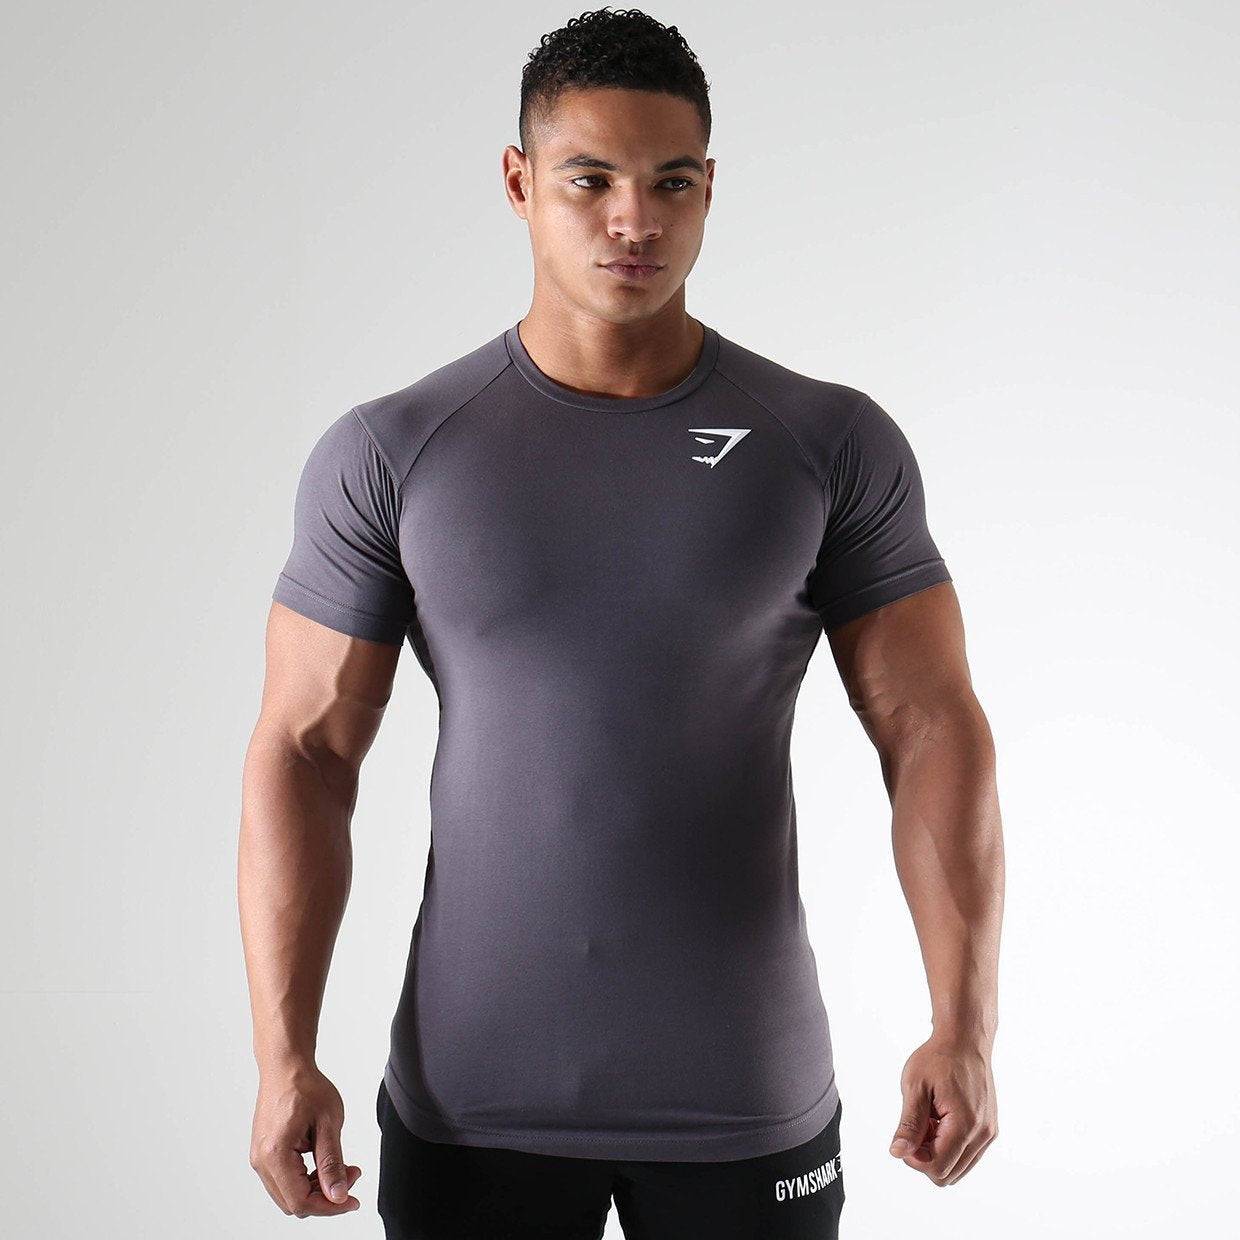 Form T-Shirt V2 in Charcoal - view 3